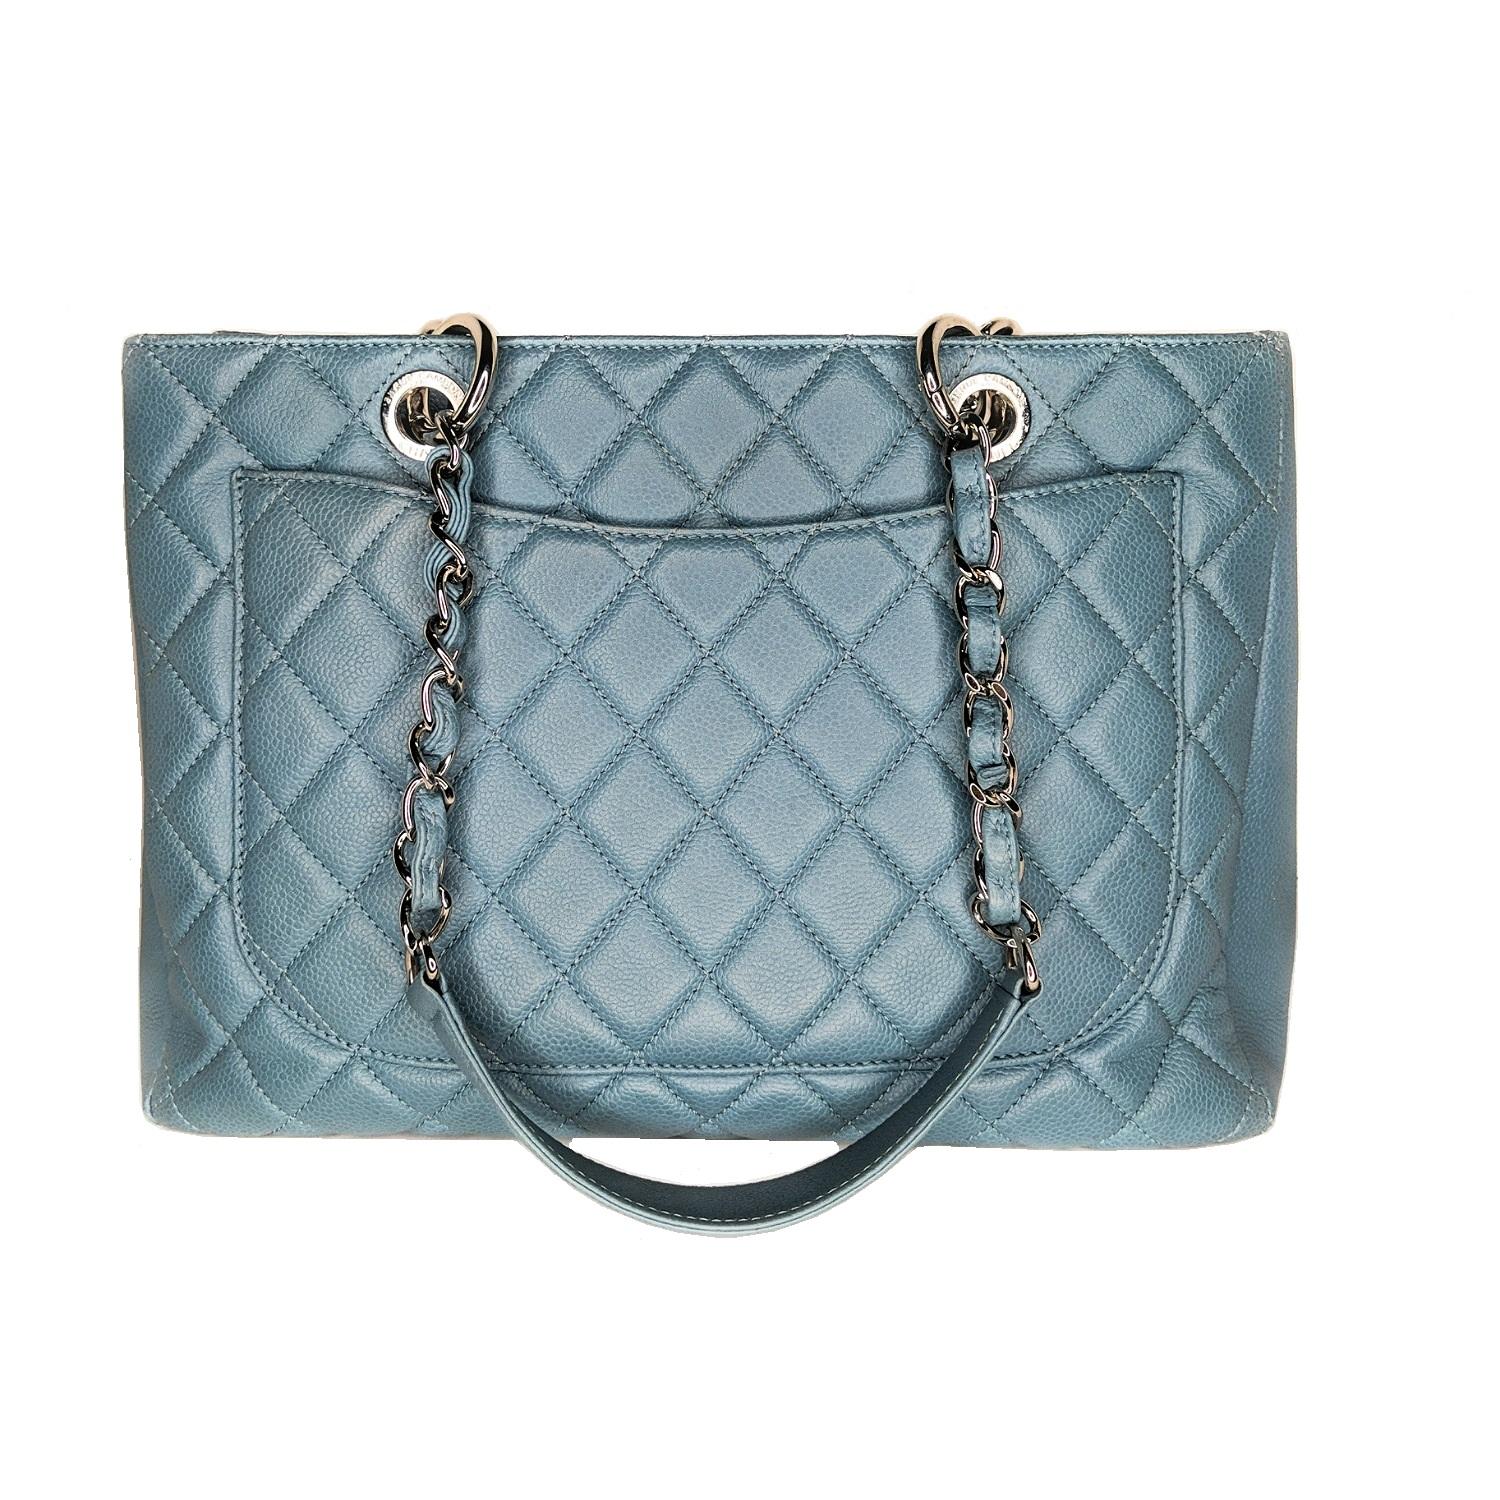 This stylish tote is crafted of diamond-quilted caviar leather in blue. This shoulder bag features leather-threaded polished silver chain-link shoulder straps with shoulder pads, a quilted Chanel CC logo on the front, and a flat pocket on the rear.